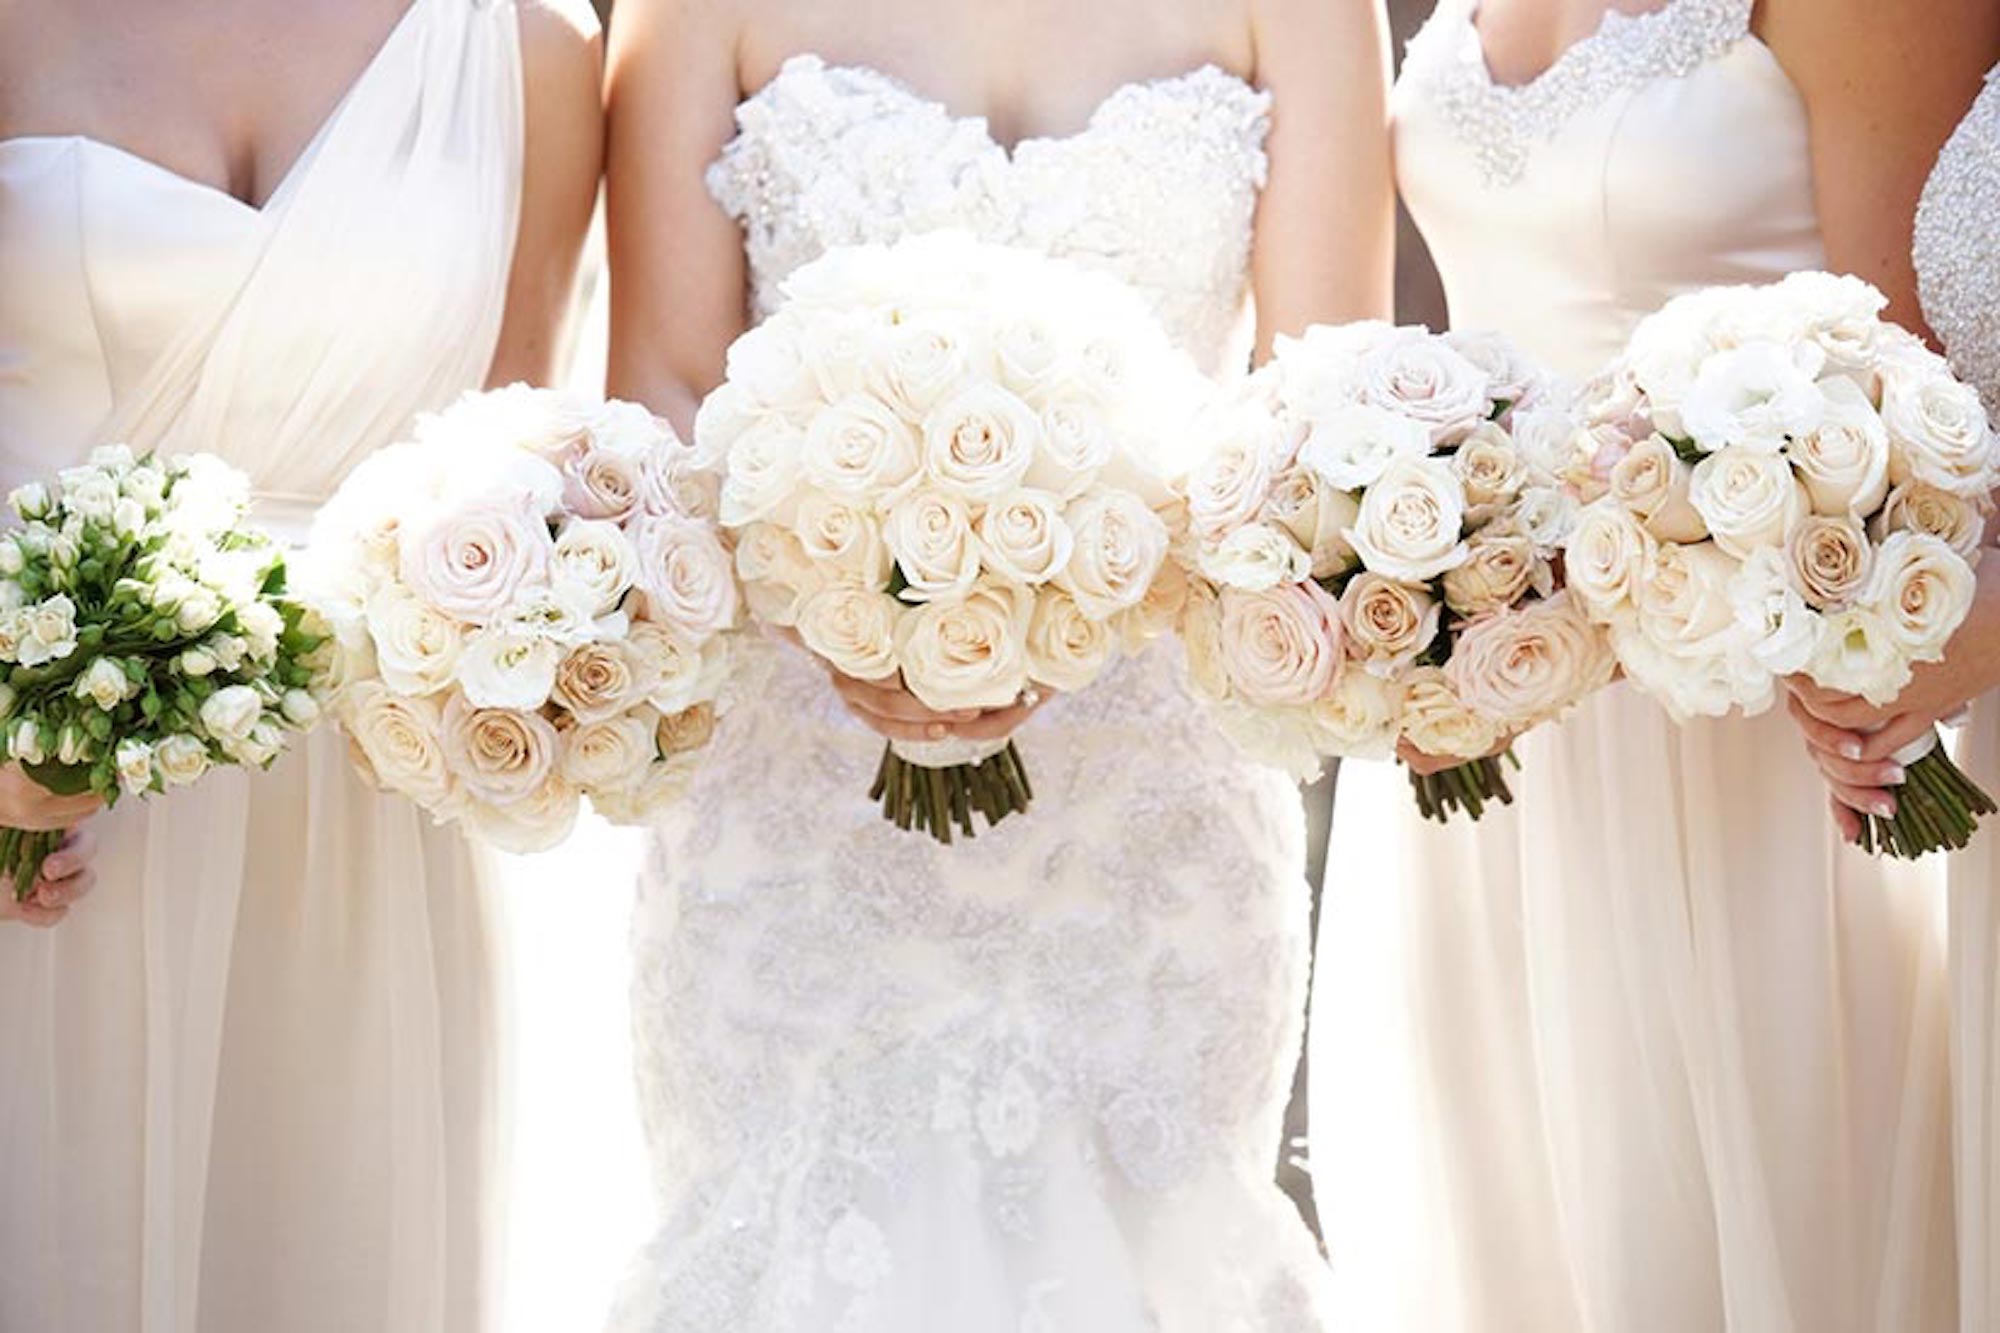 A bride and bridesmaids with rose bouquets